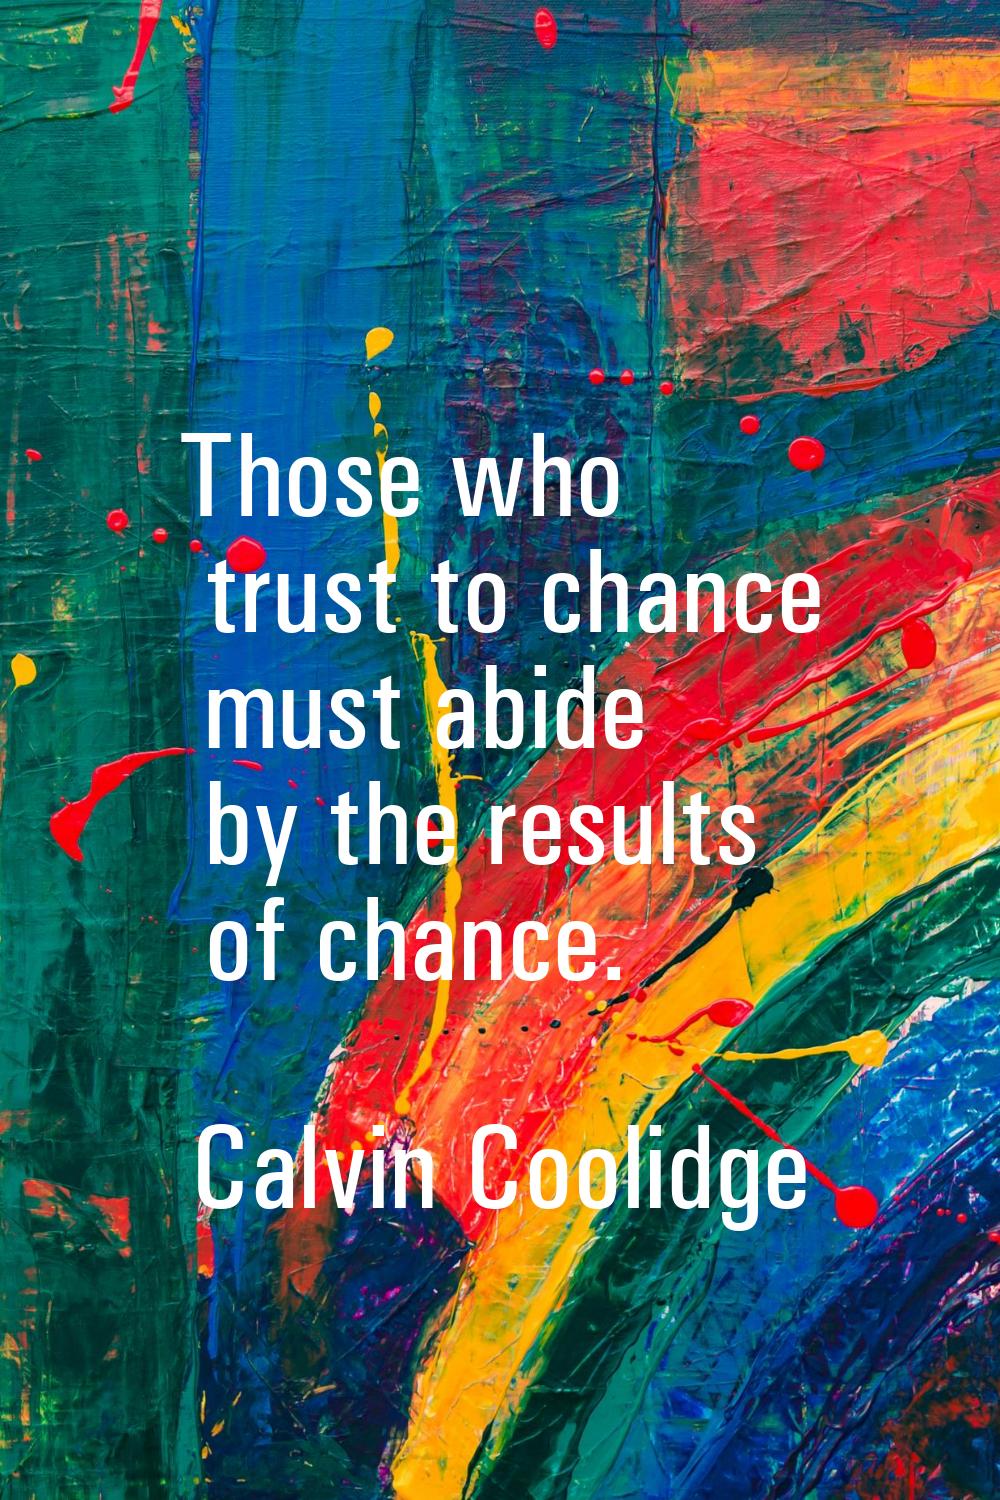 Those who trust to chance must abide by the results of chance.